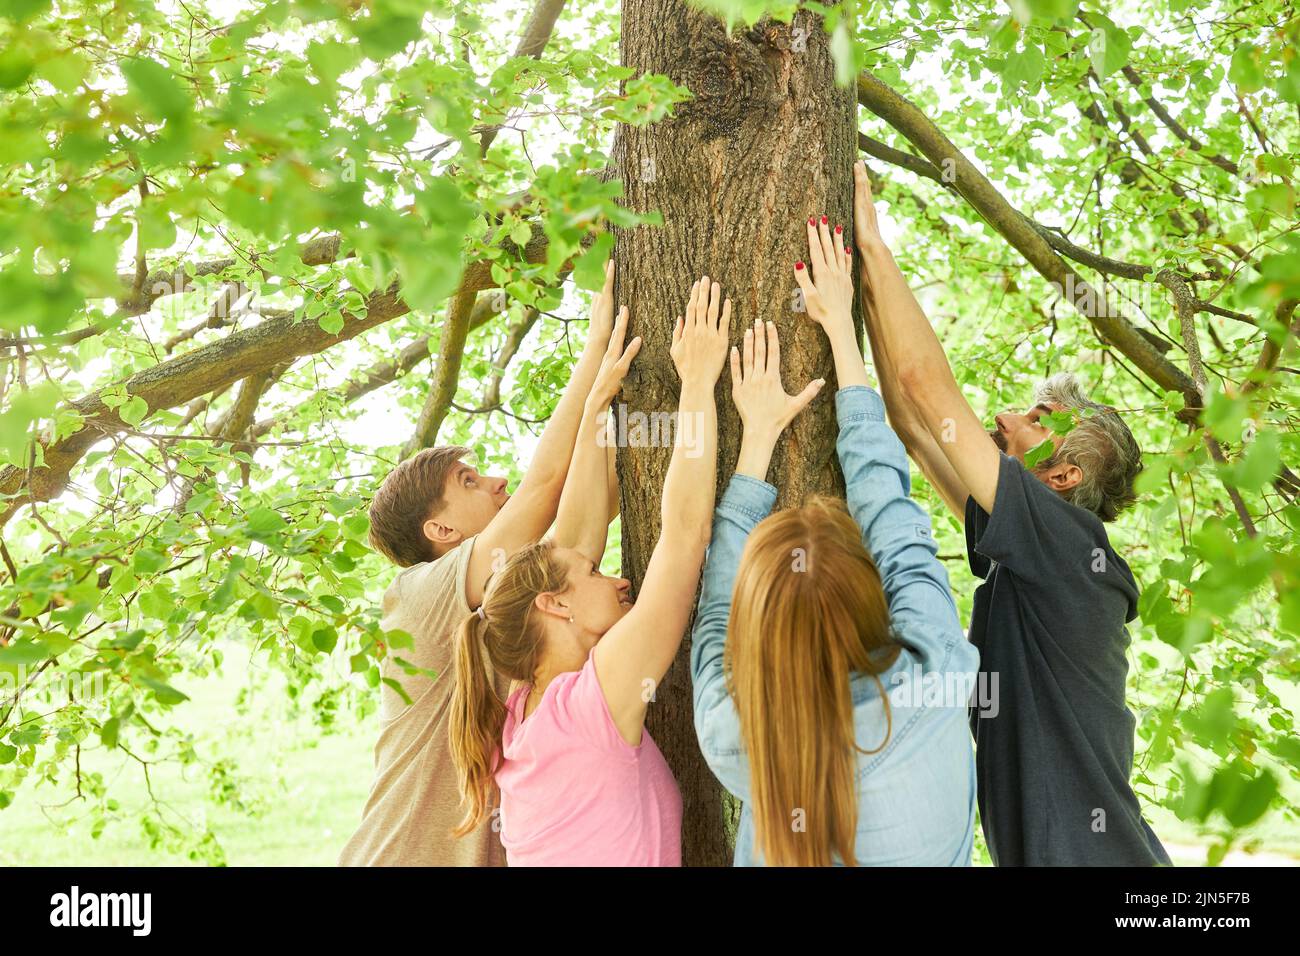 Group of people touching tree trunk with hands in forest bathing as relaxation Stock Photo